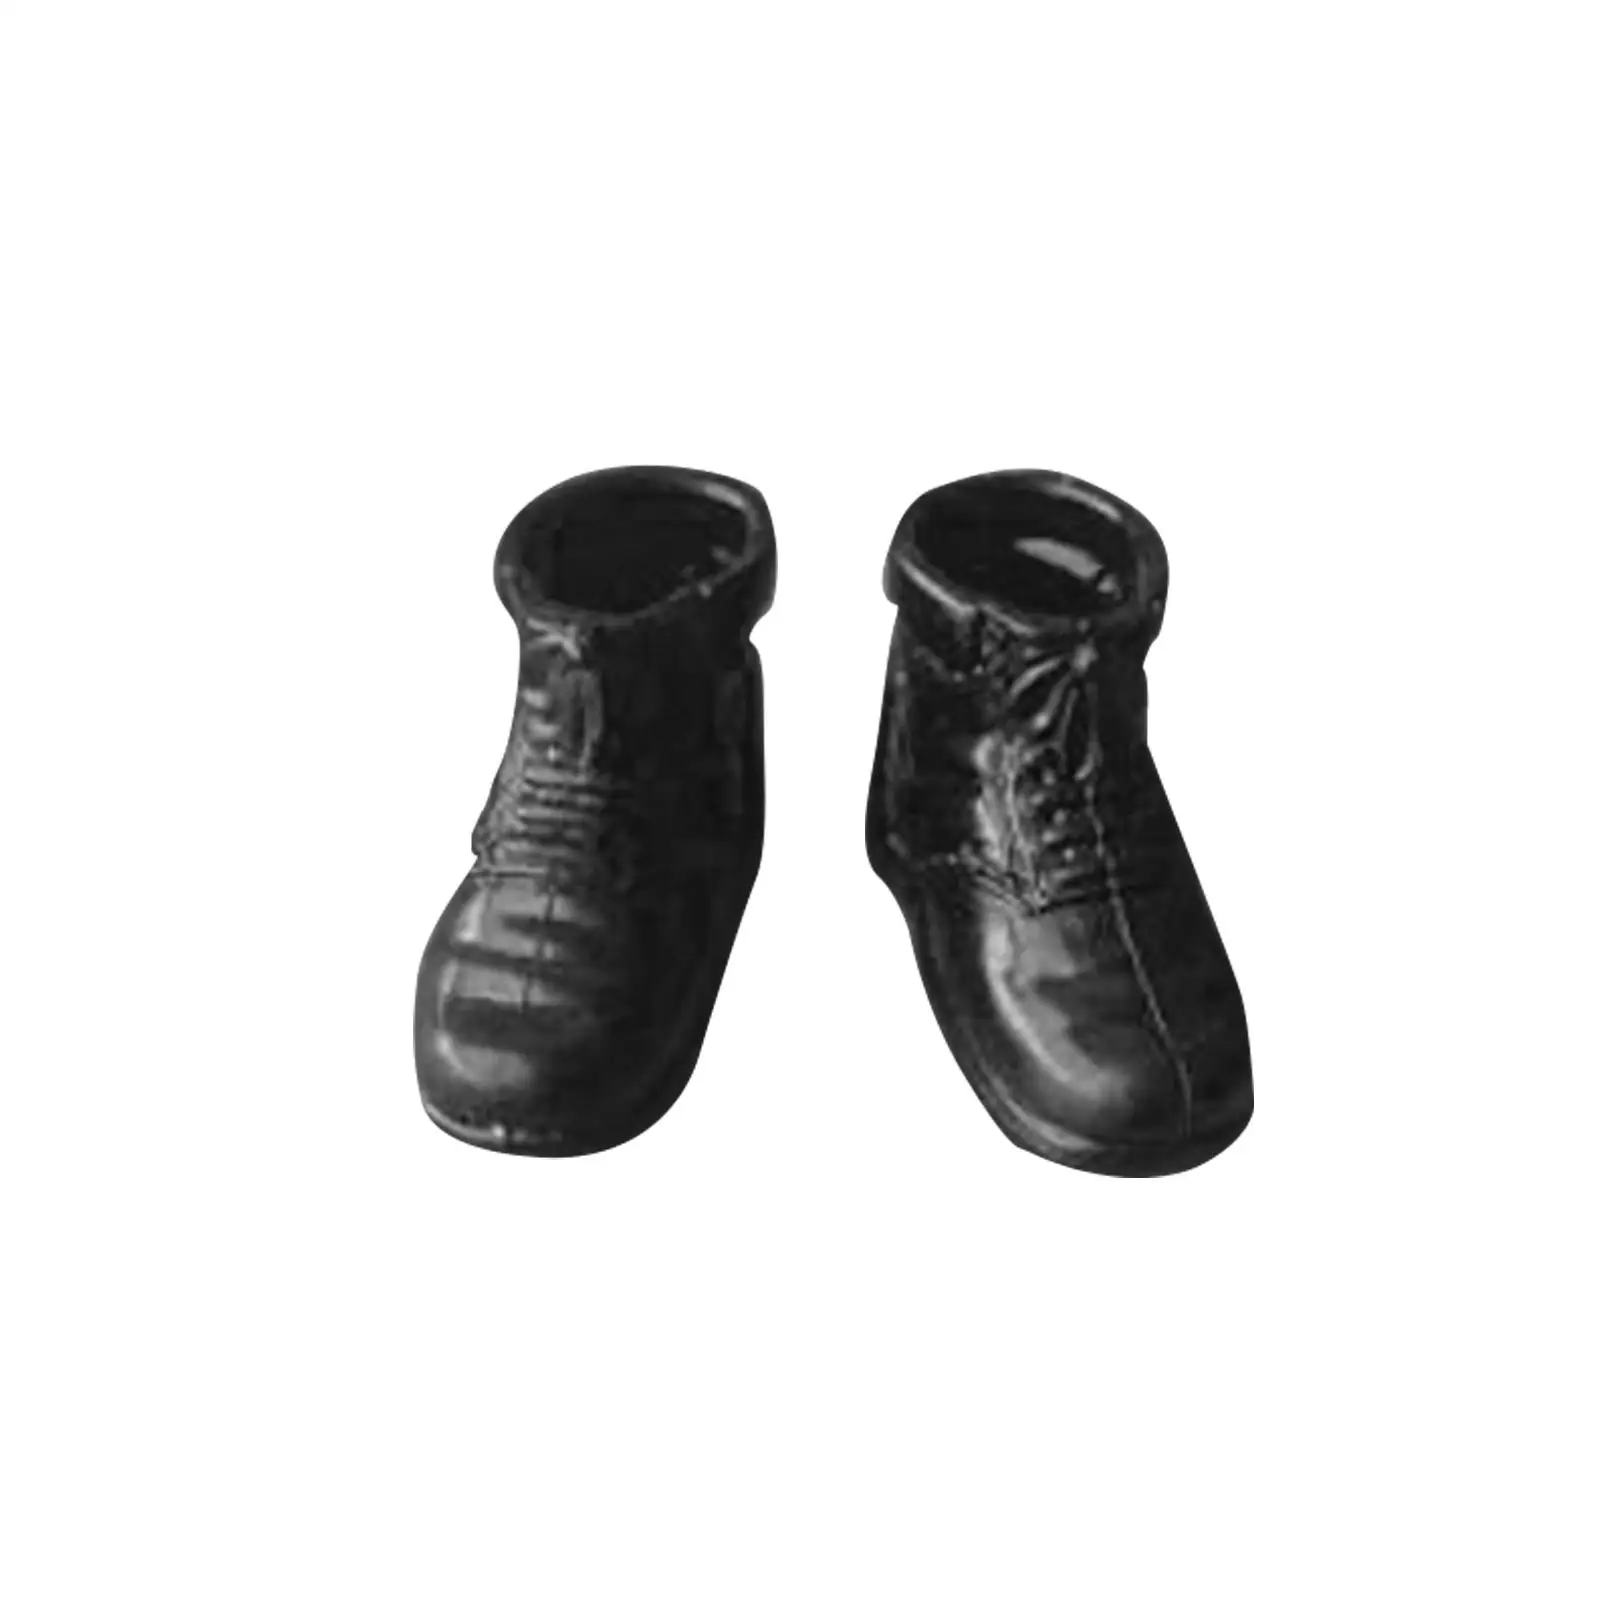 1/6 Scale Figure Booties Shoes Miniature Soldier Costume Casual Female Figure Boots Costume for 12`` inch Soldier Figures